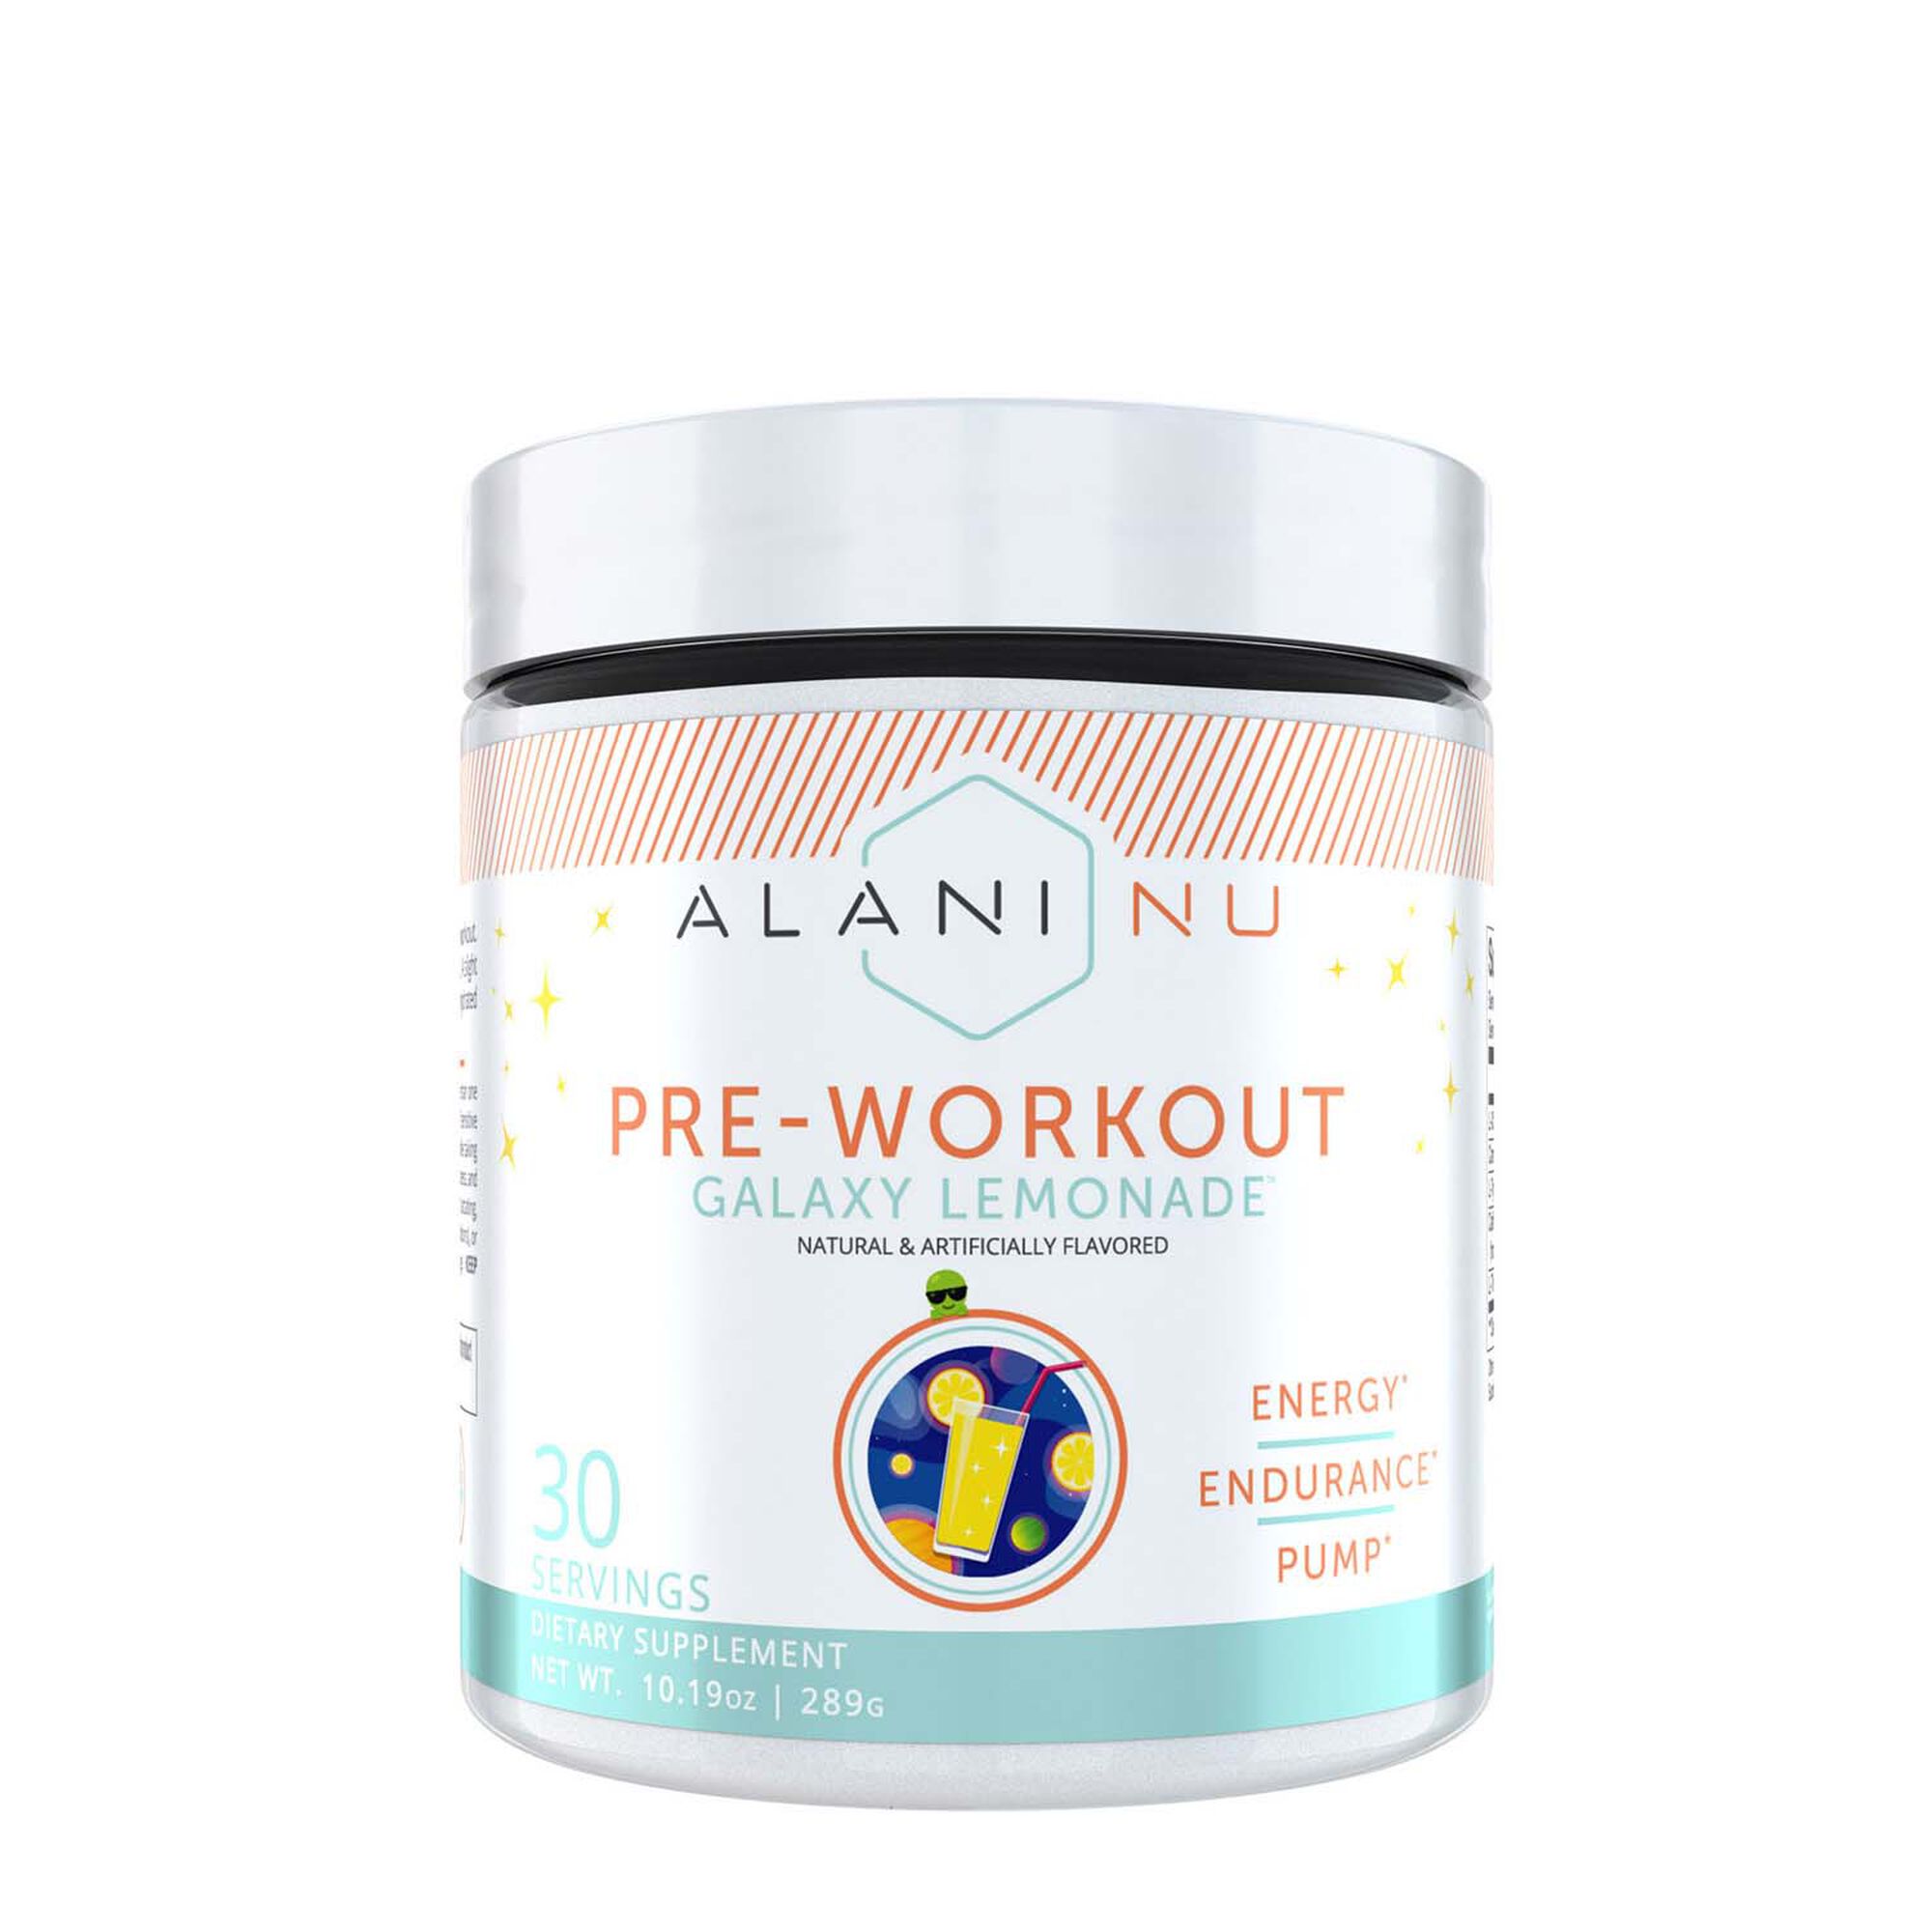 10 Minute Alani nu best pre workout flavor for Fat Body